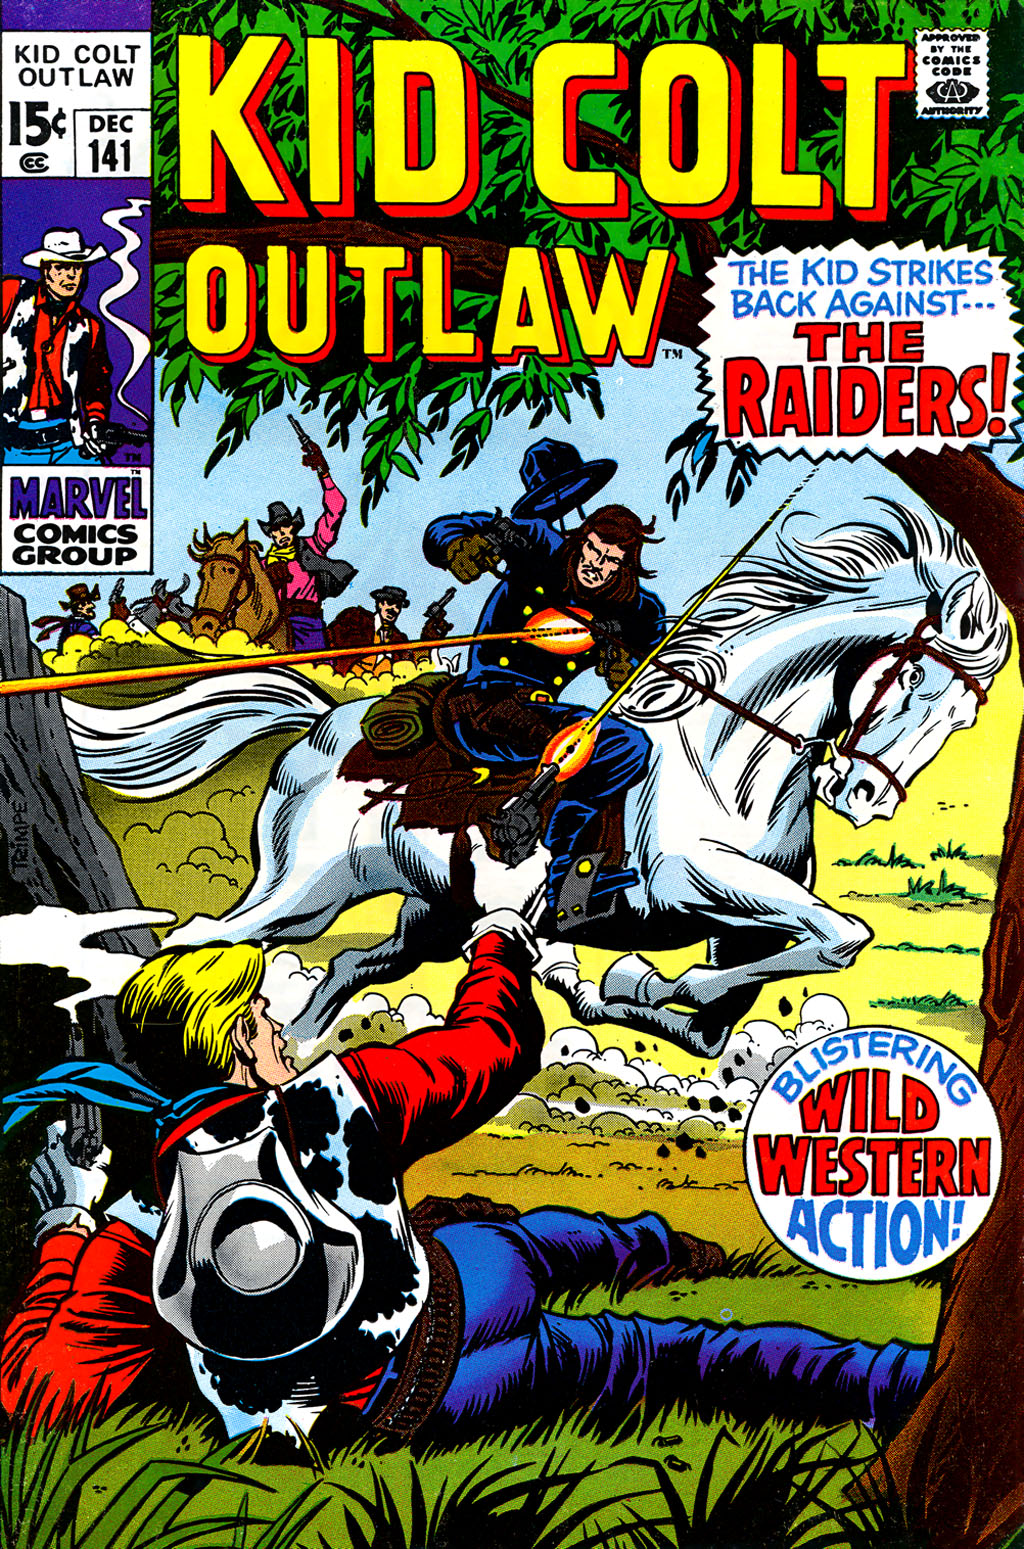 Read online Kid Colt Outlaw comic -  Issue #141 - 1